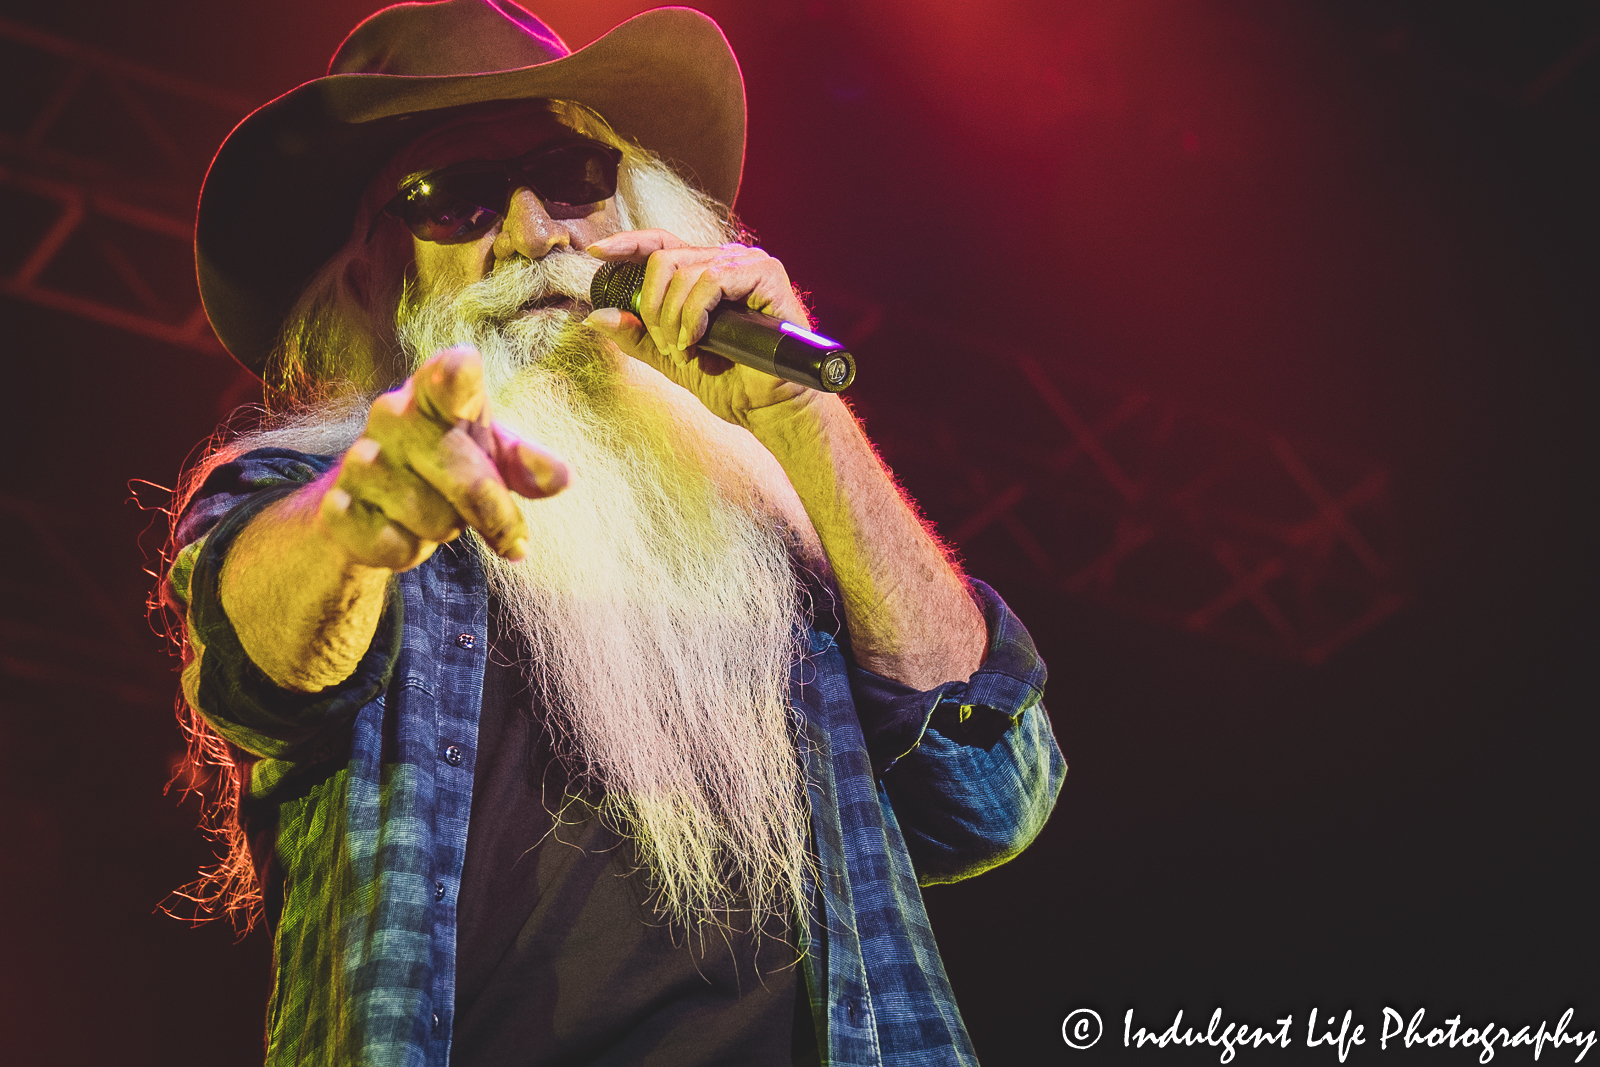 Baritone singer William Lee Golden of country and gospel music group The Oak Ridge Boys live in concert at Ameristar Casino in Kansas City, MO on September 24, 2021.